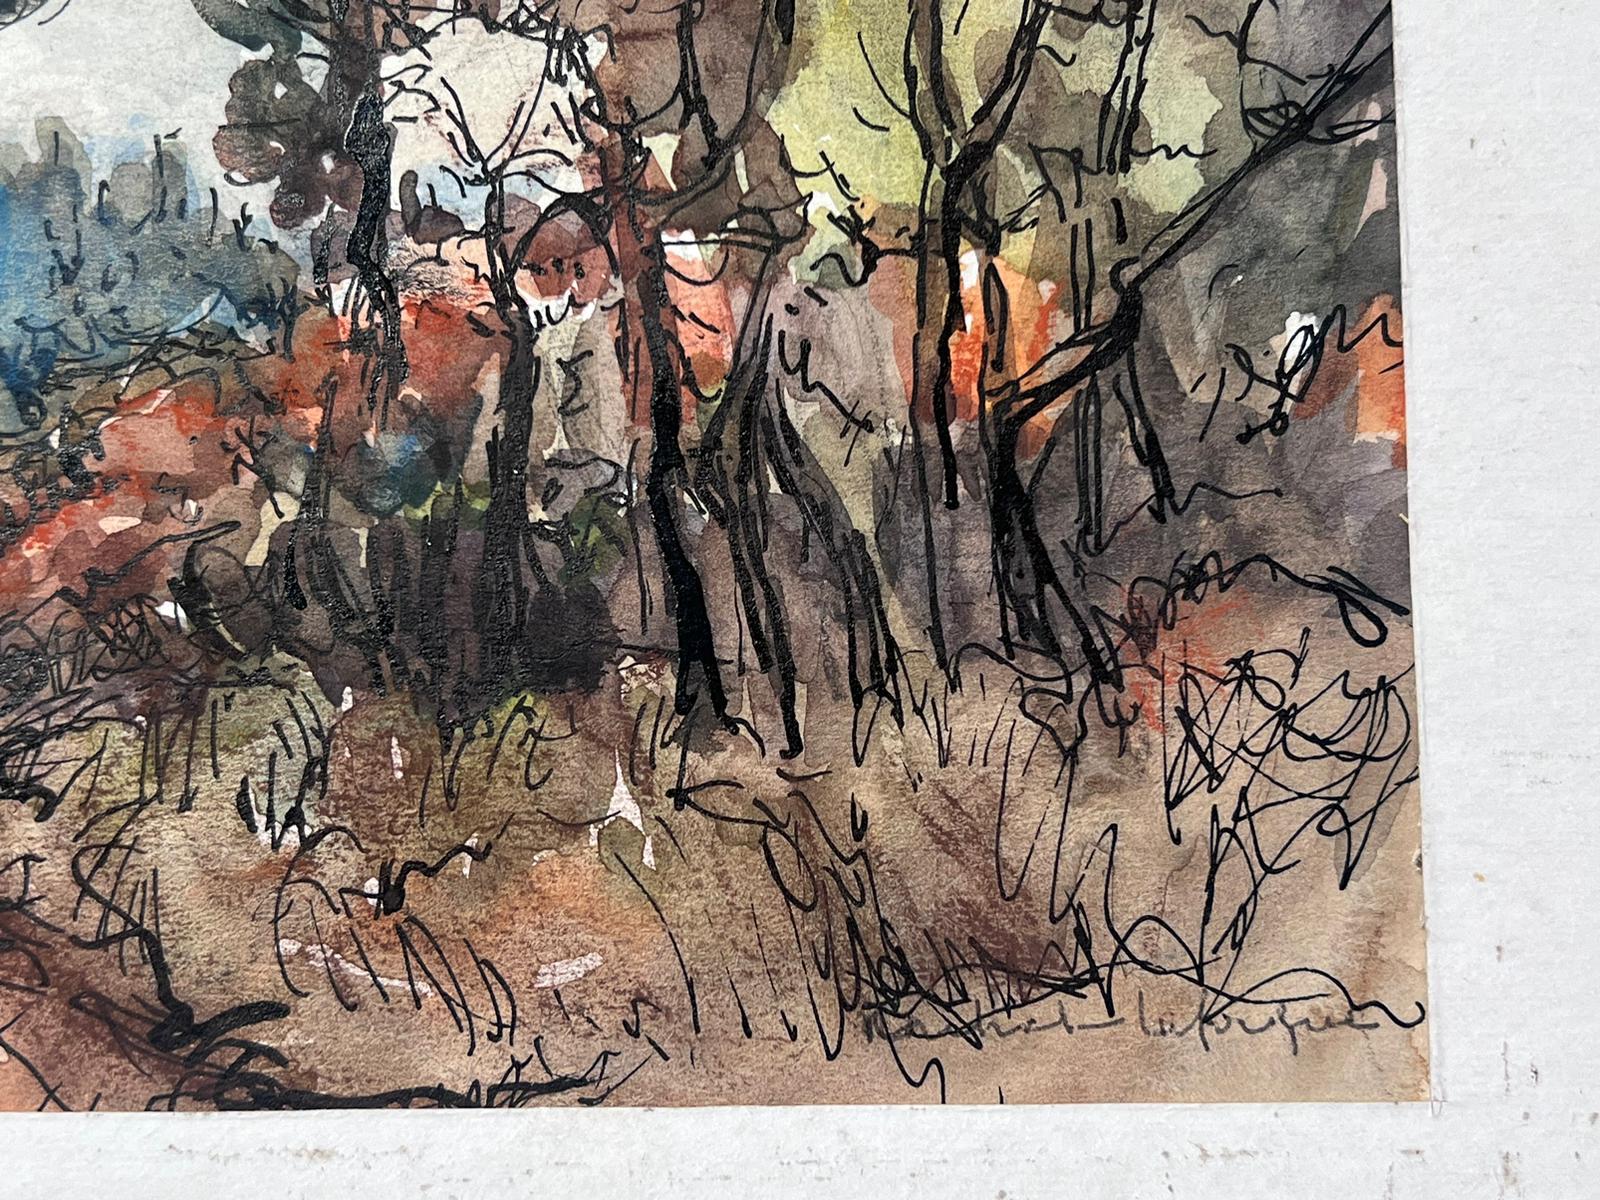 Jean La Forgue (French 1901-1975) 
signed watercolour, ink on paper, mounted in a card frame
inscribed verso
card frame: 15 x 19 inches
painting: 8 x 9 inches
provenance: the artists estate, France
condition: very good and sound condition; there are